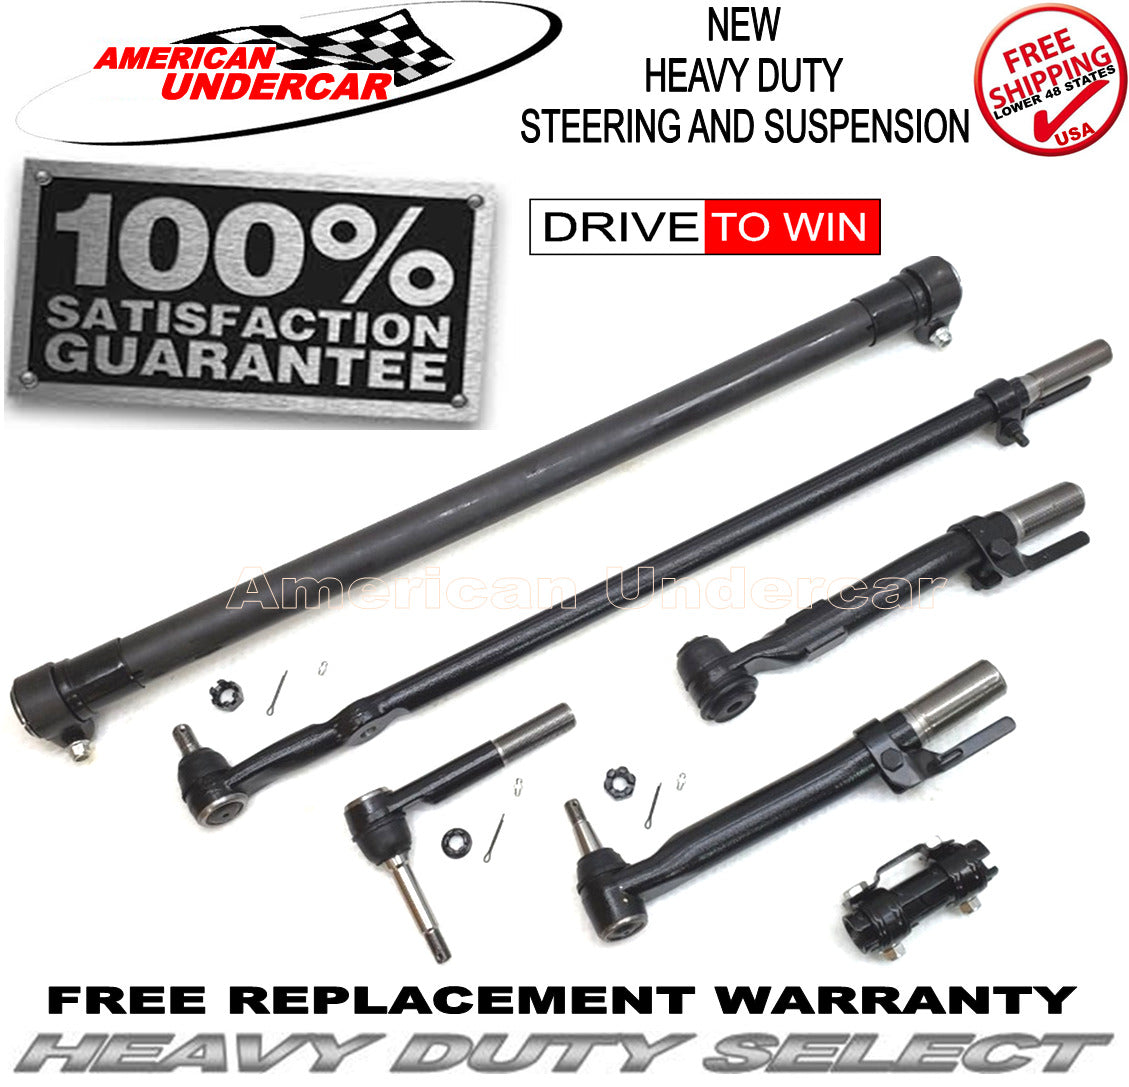 HD Steering Suspension Kit for 2017-2022 Ford F250 Super Duty 4x4 Narrow Frame